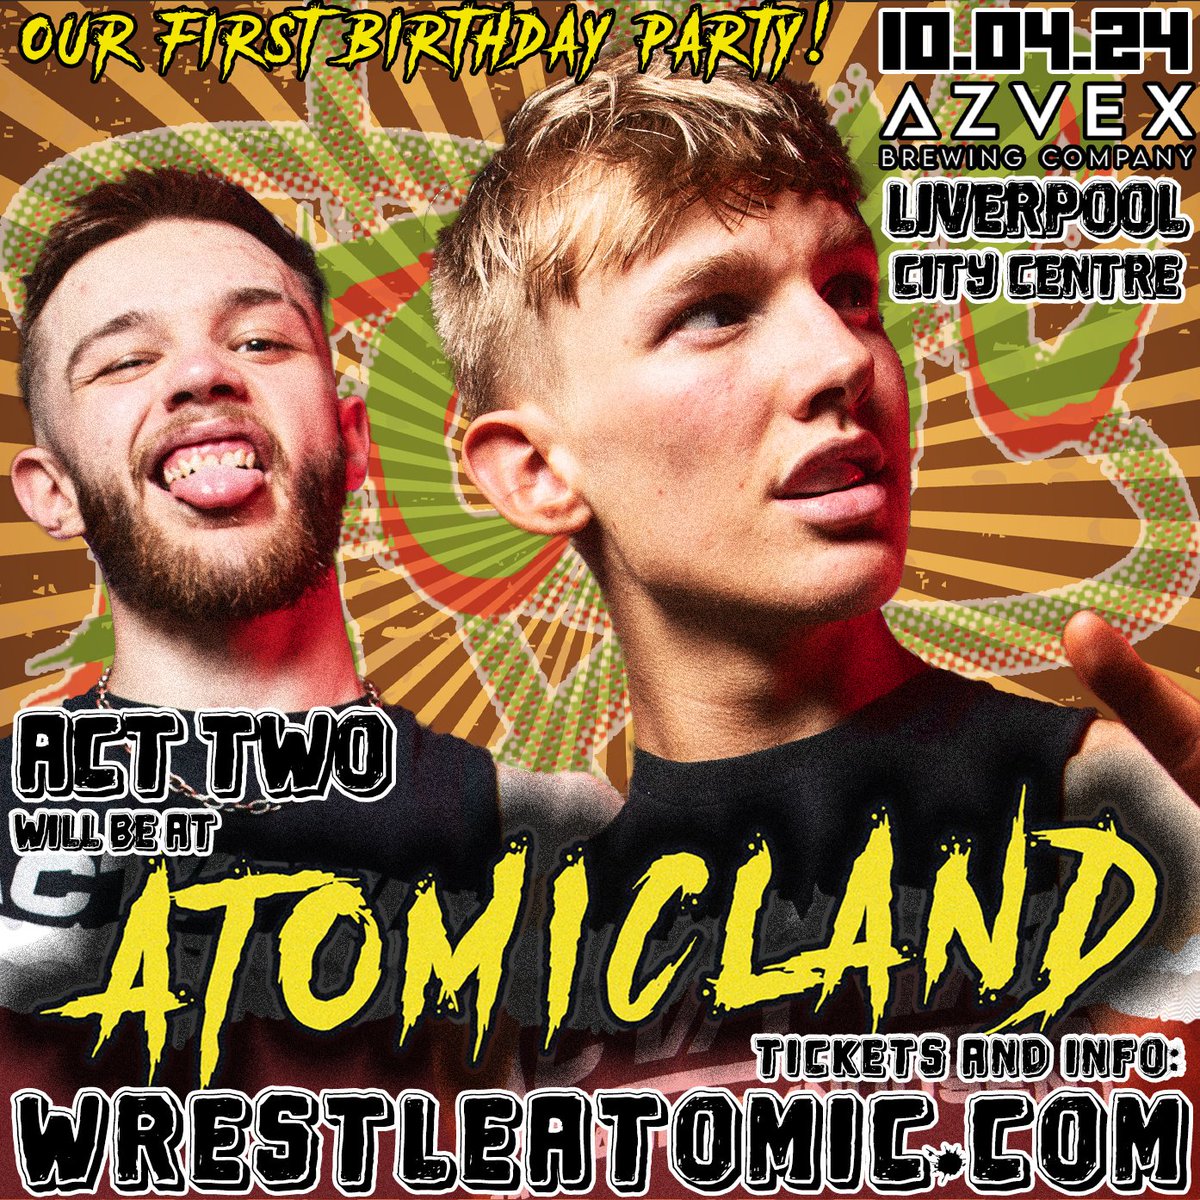 🎪⚛️ ATOMICLAND ⚛️🎪 That's right, the boys are back in town. ACT TWO confirmed for Atomicland!